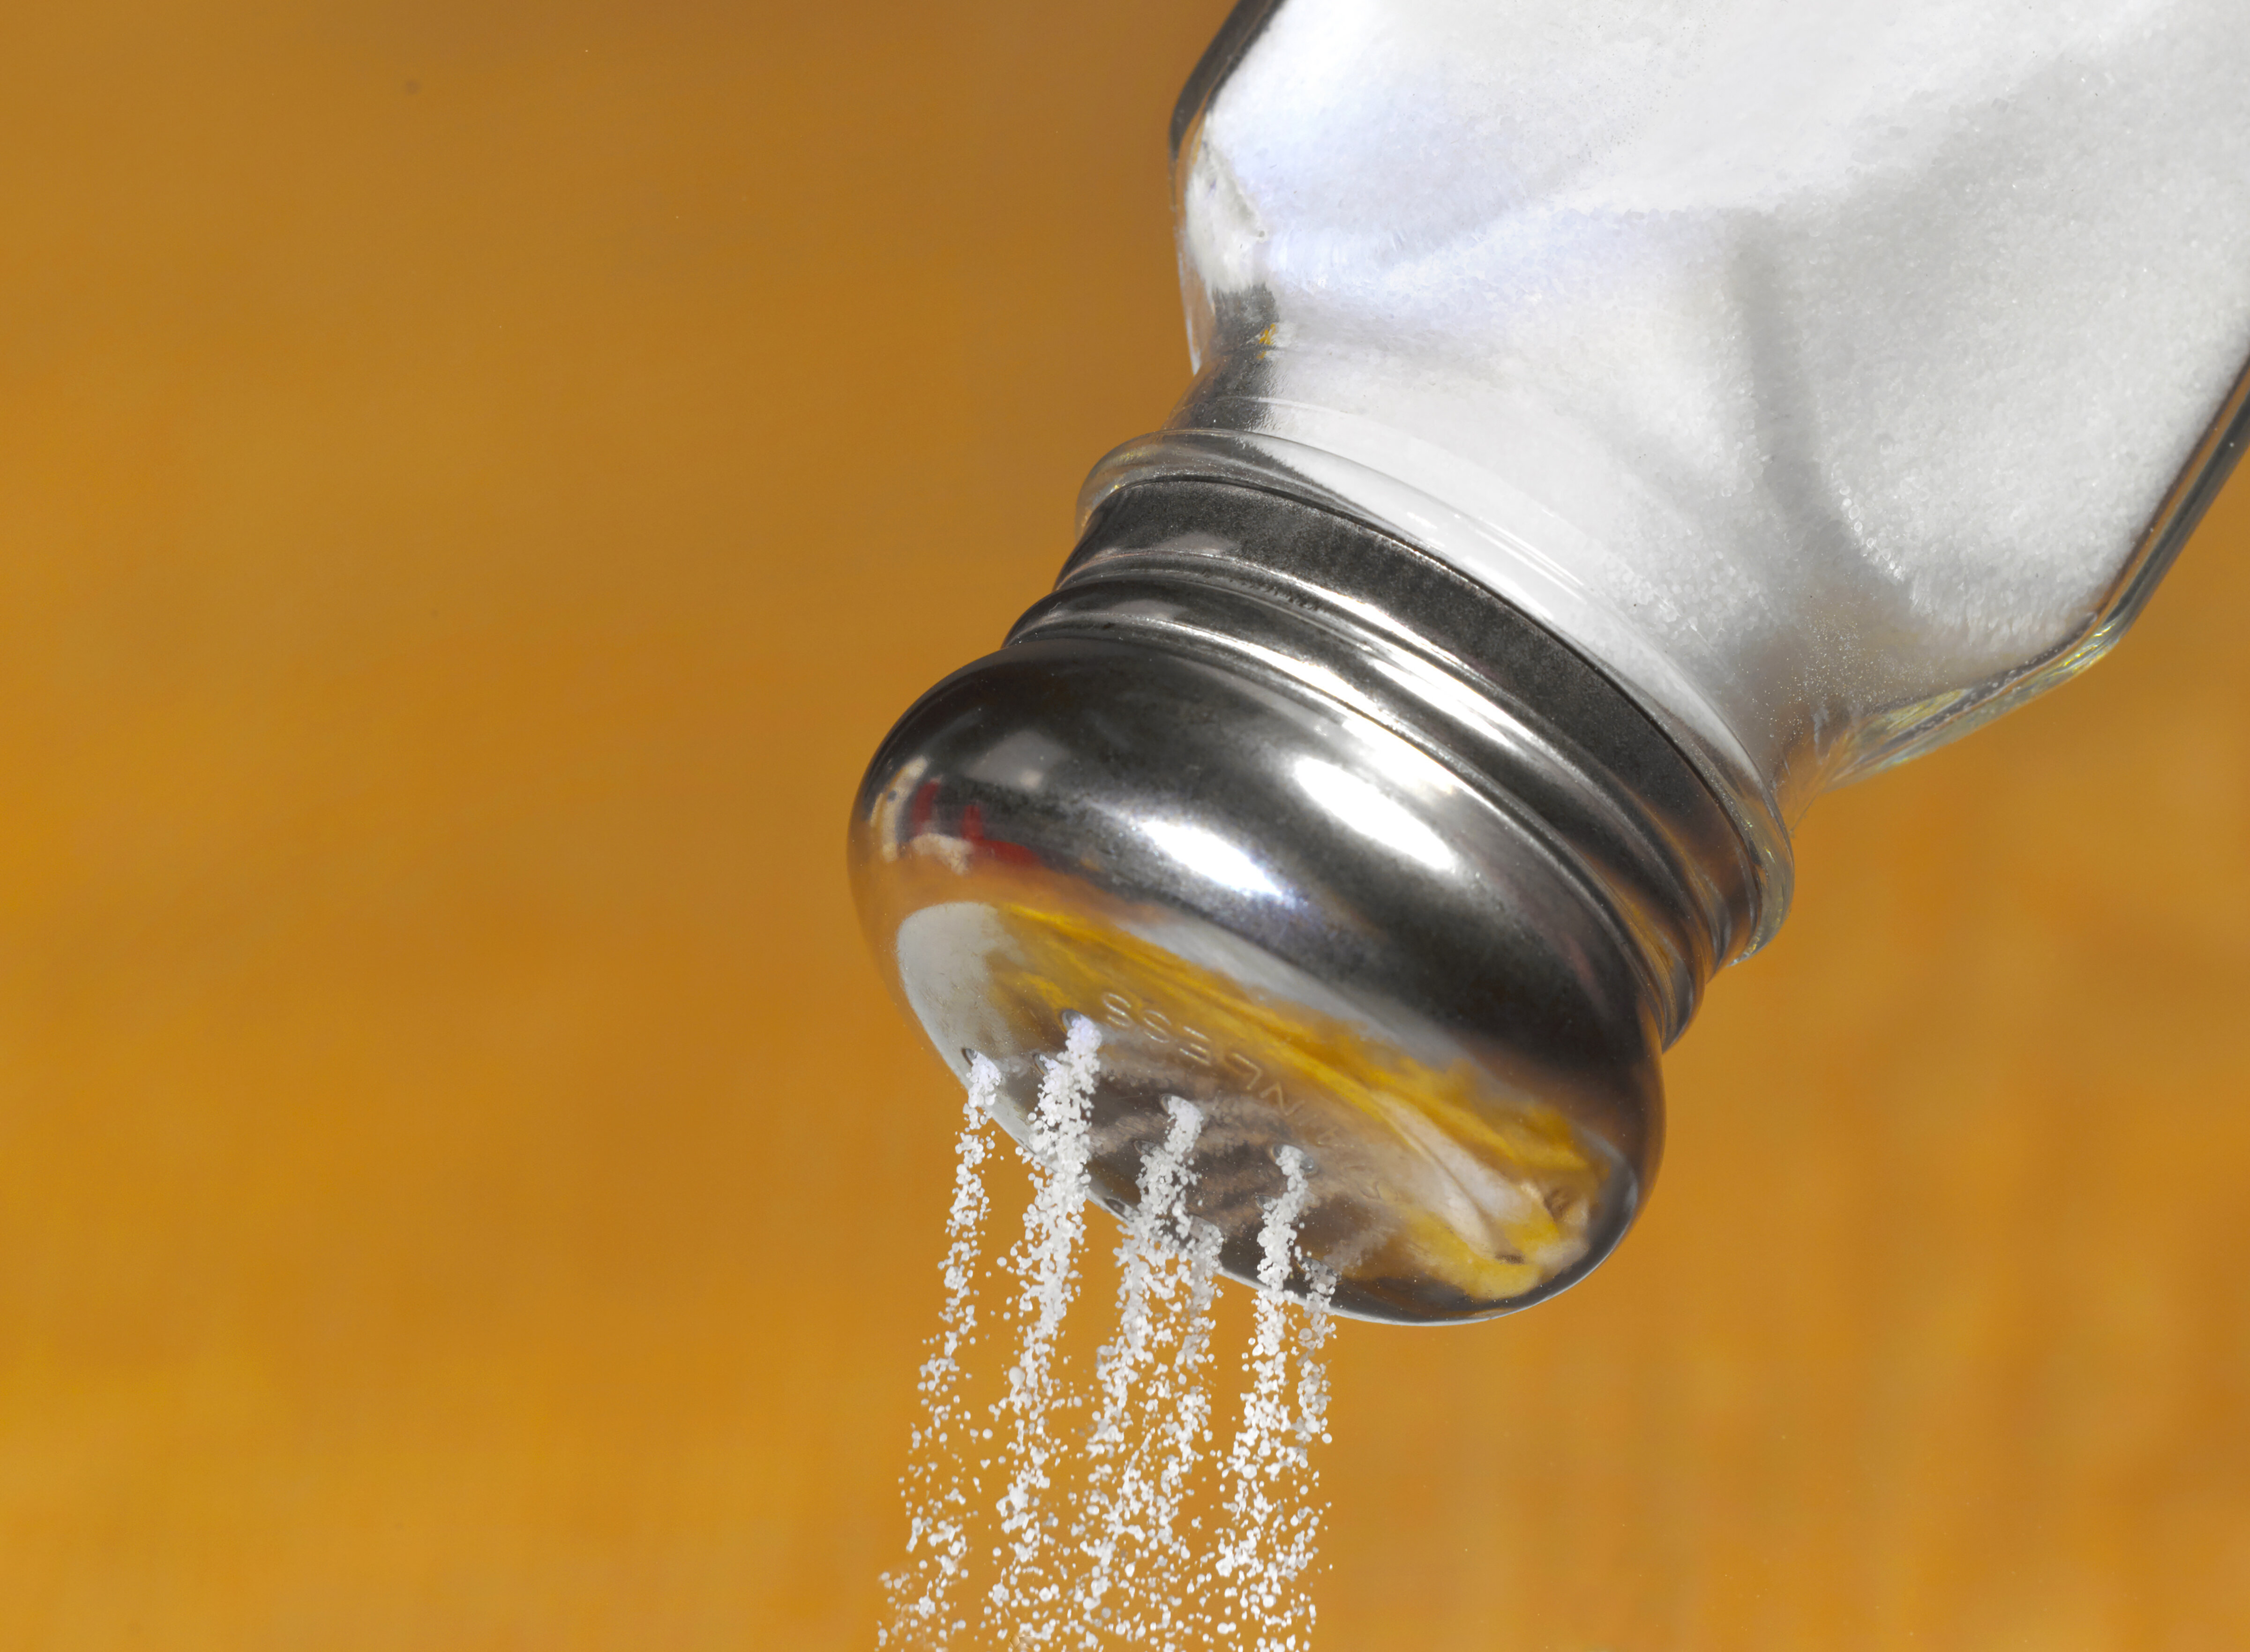 Your daily sodium intake involves a lot more than just the salt that you sprinkle on your food.